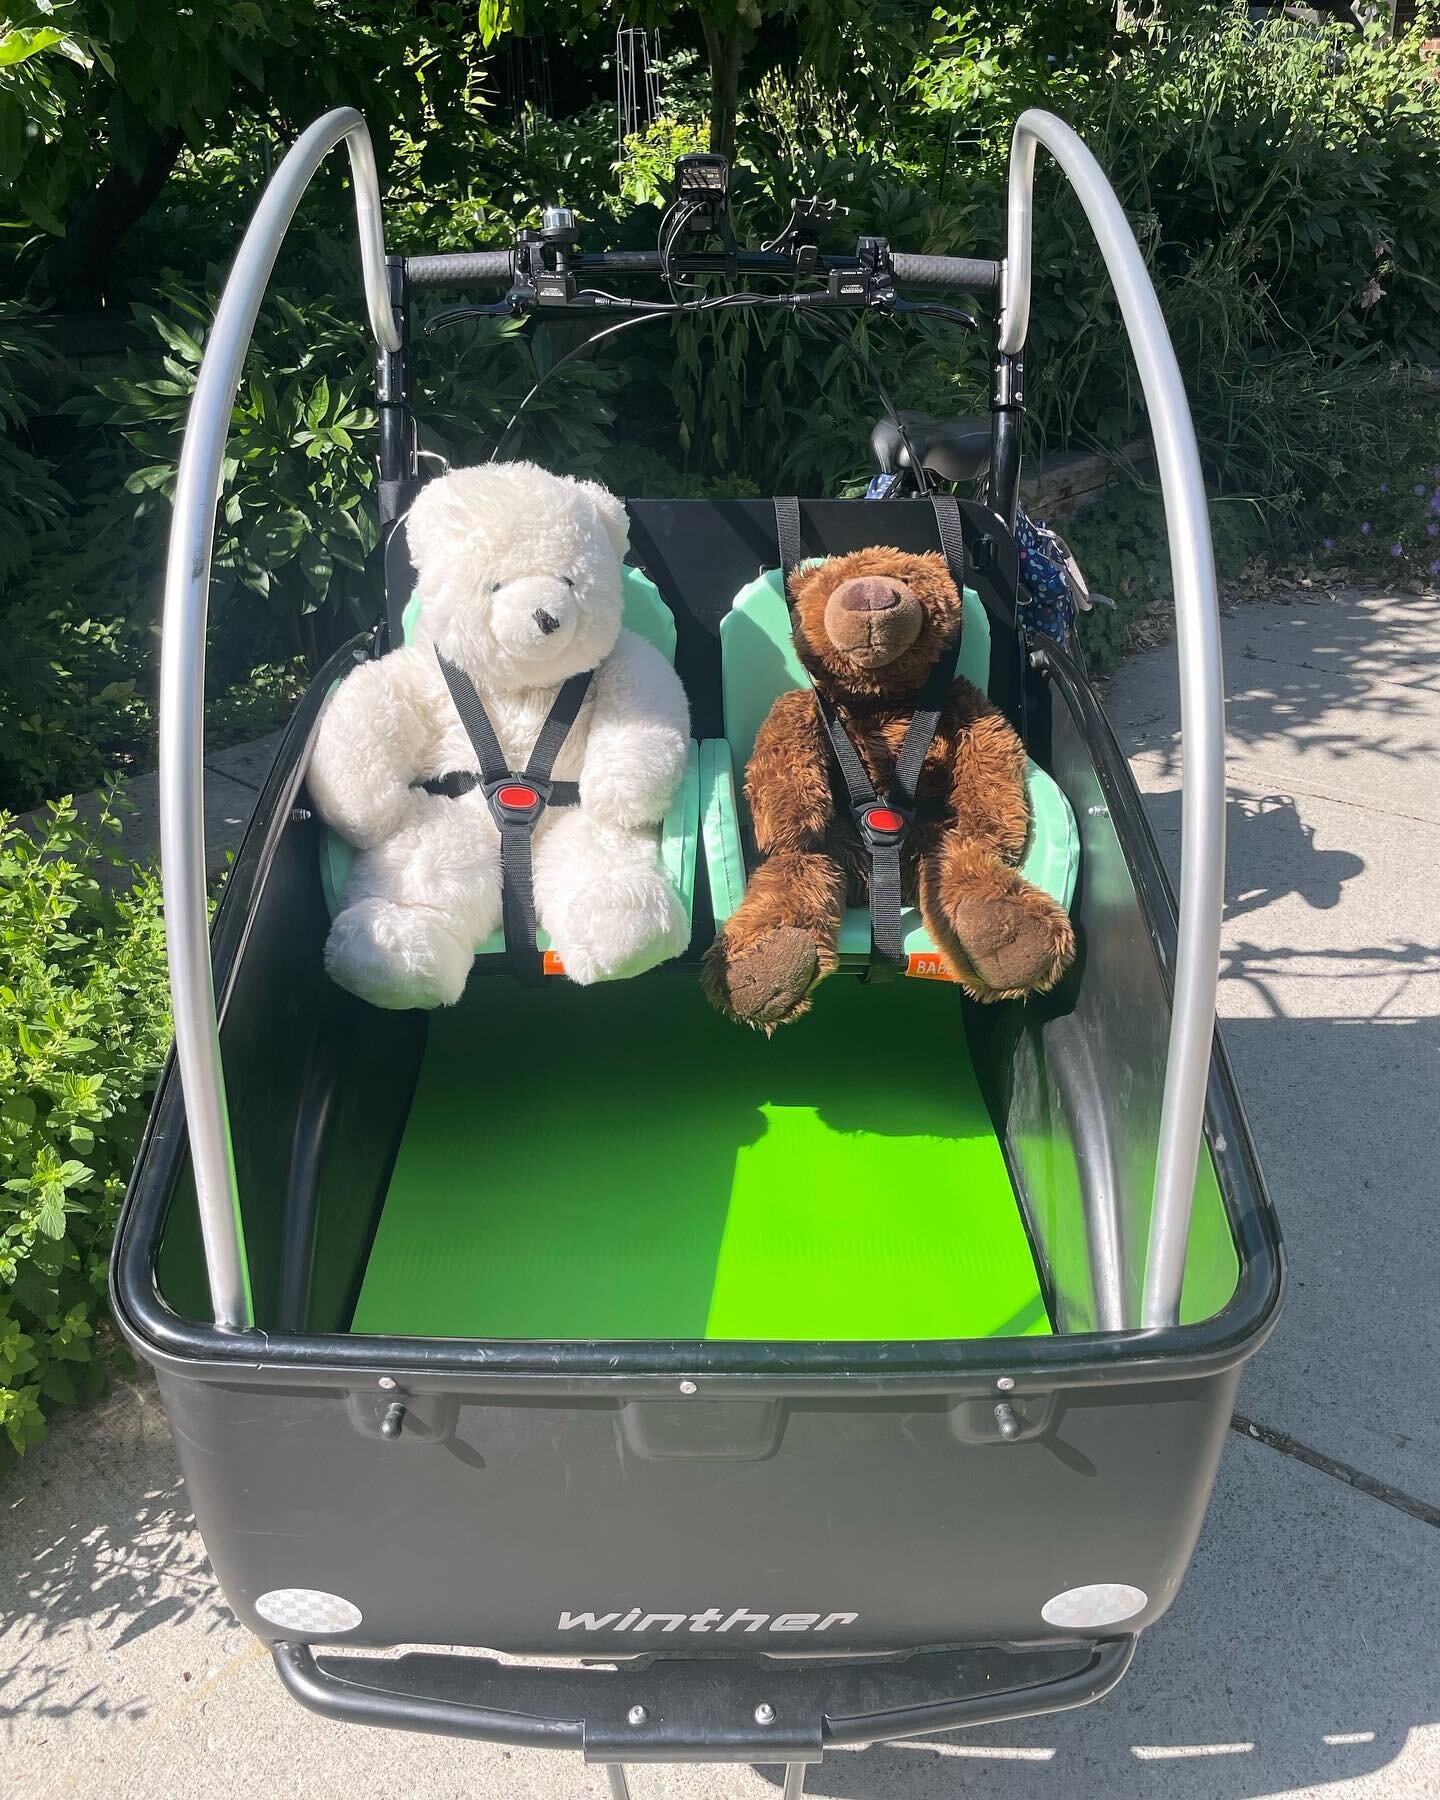 Taking your teddy bears to a picnic? Elsa the @wintherbikes trike has some cushy upgrades to keep them comfy on the way! A yoga mat cushions your cargo while twin seats from @babboe_cargobike keep children cozy and contained. See availability and inf